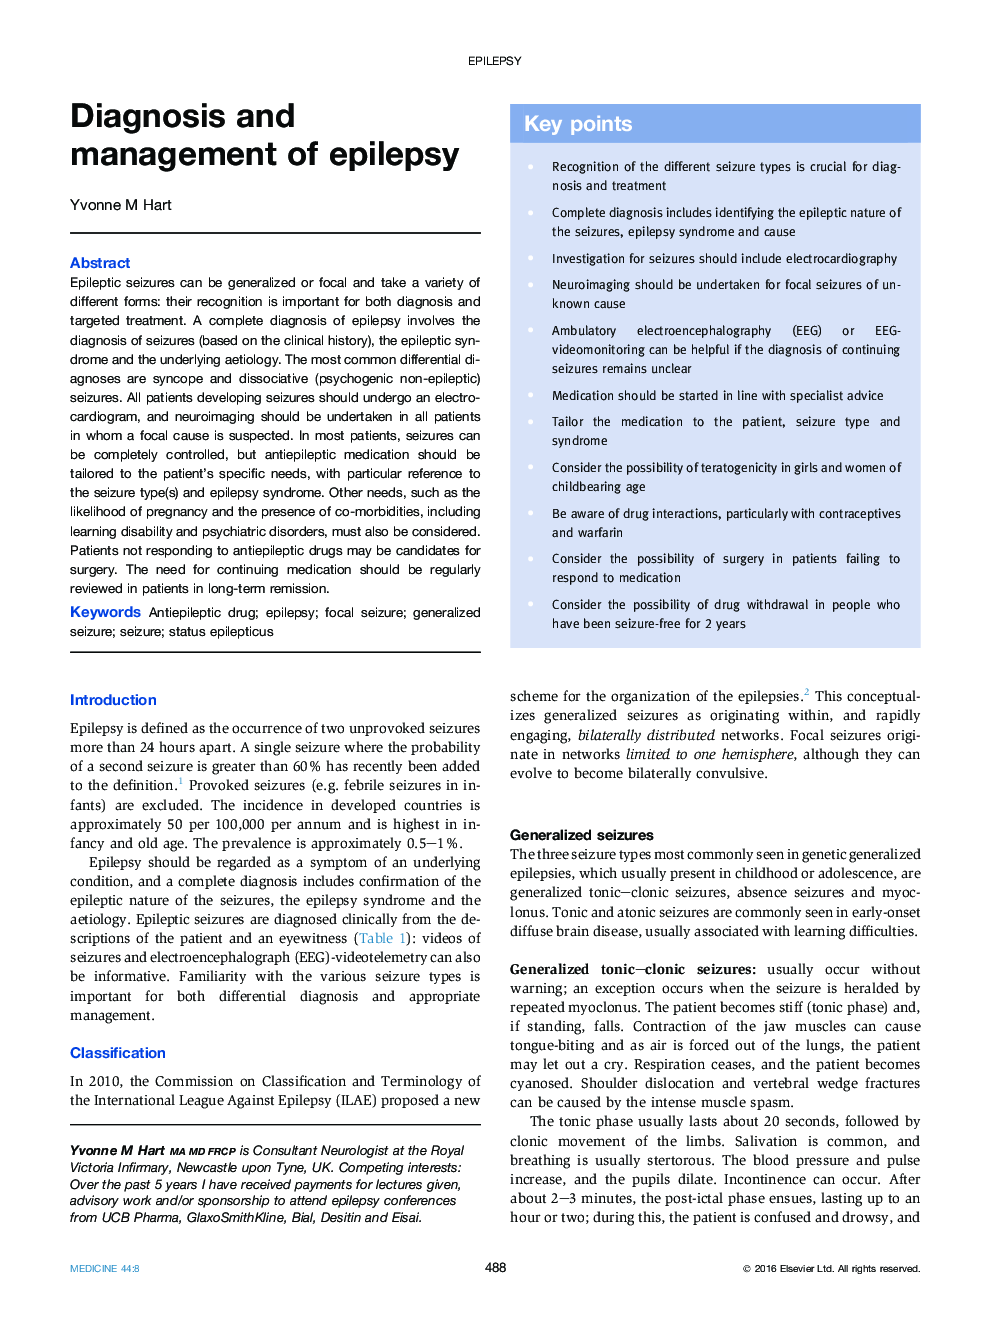 Diagnosis and management of epilepsy